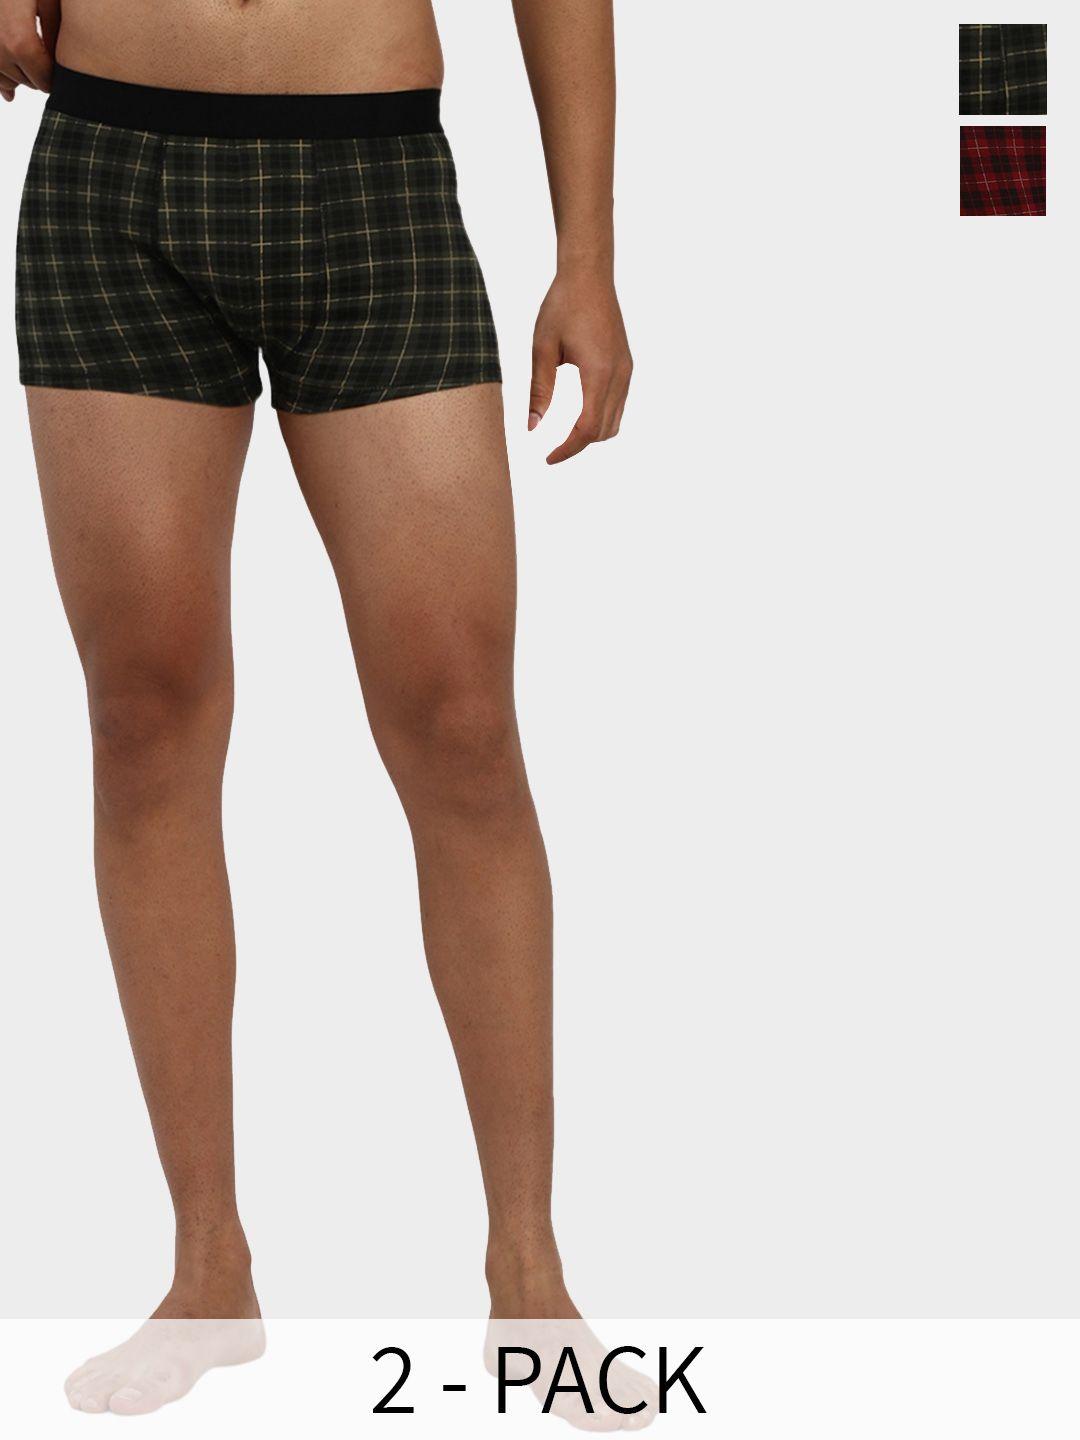 r&b pack of 2 checked cotton boxer briefs 8909006053343